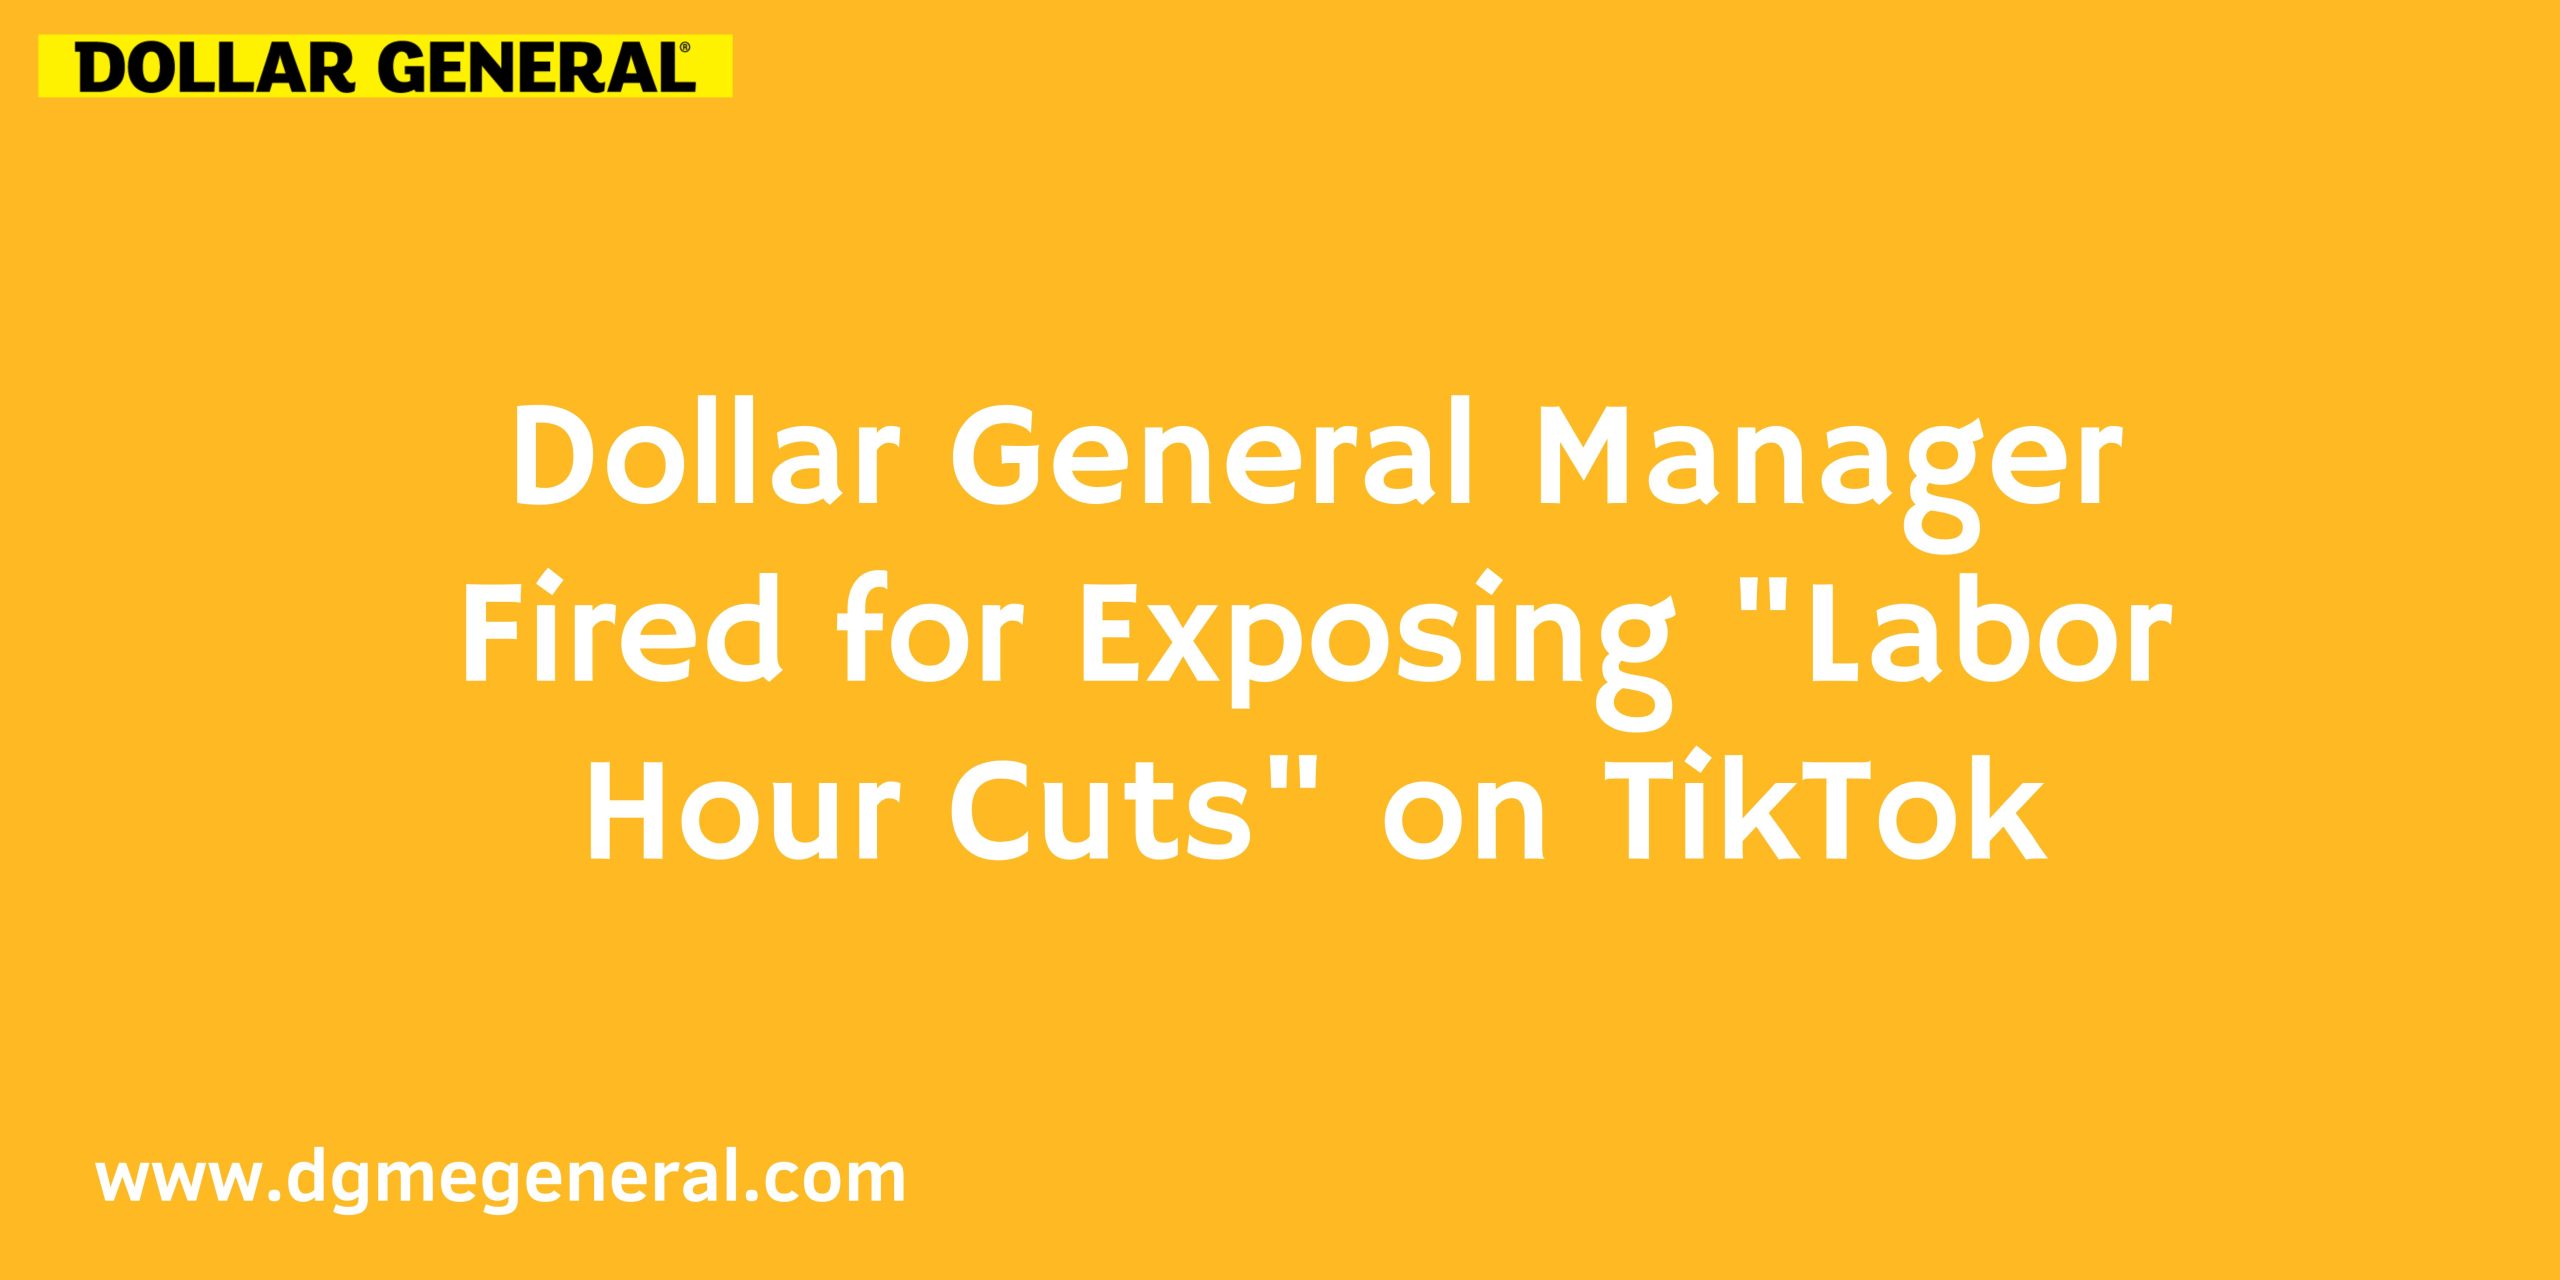 Dollar General Manager Fired for Exposing Labor Hour Cuts on TikTok